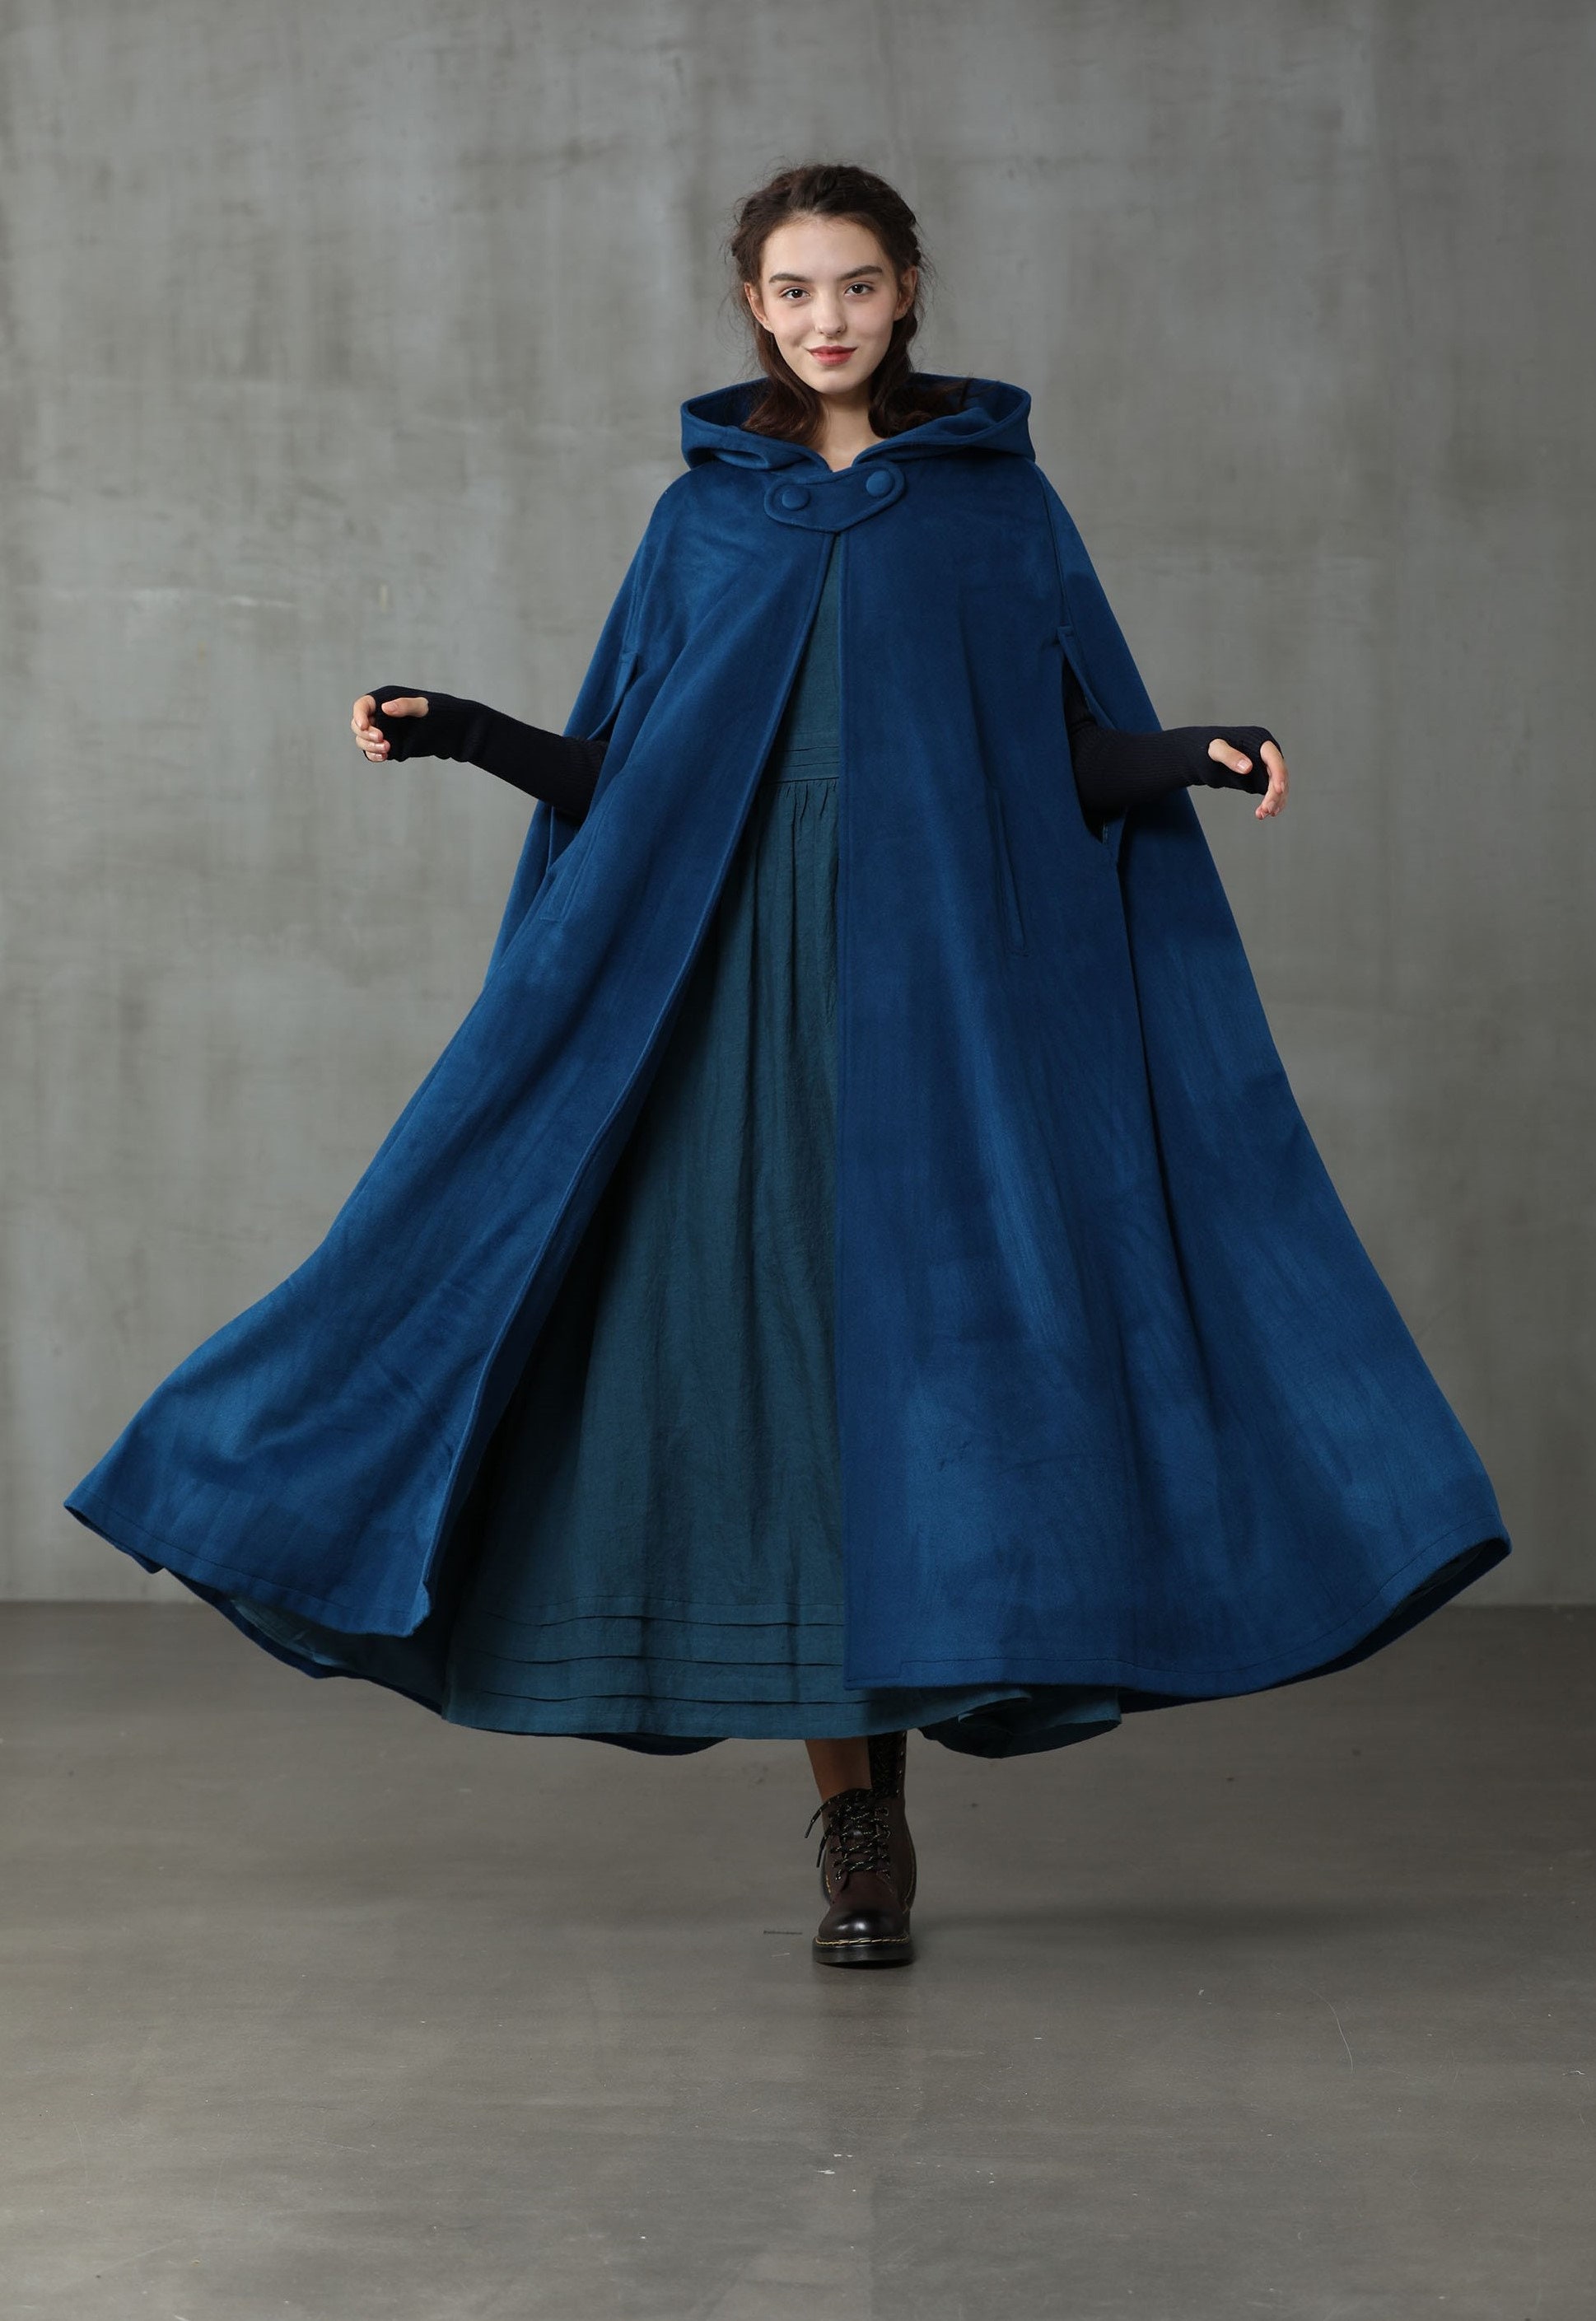  Gihuo Women's Wool Hooded Cape Solid Color Maxi Cloak